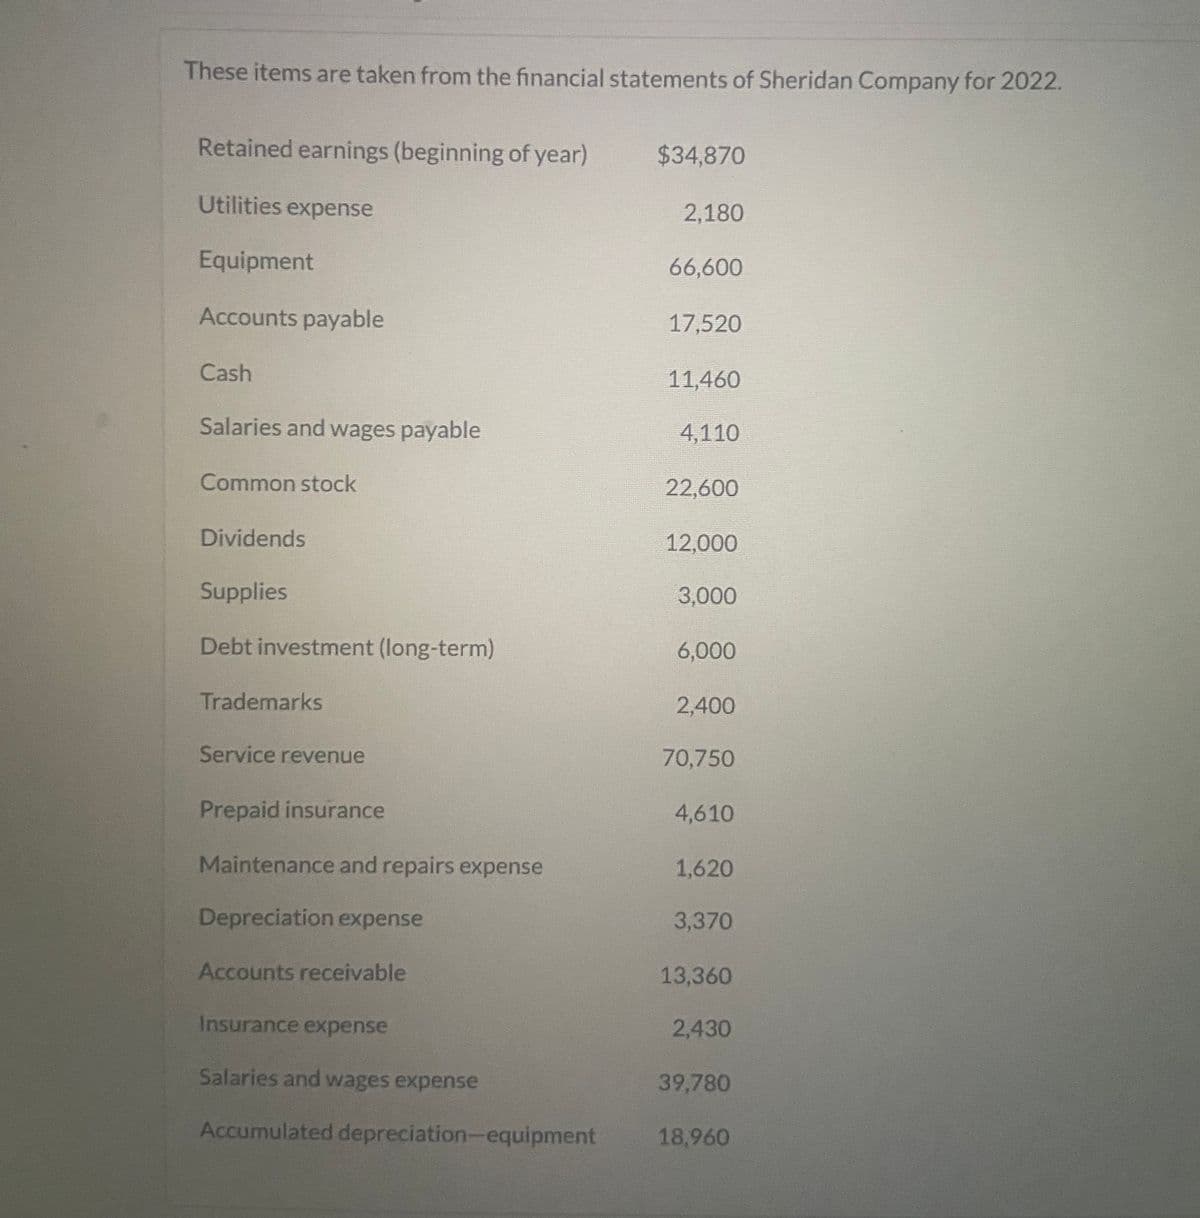 These items are taken from the financial statements of Sheridan Company for 2022.
Retained earnings (beginning of year)
$34,870
Utilities expense
2,180
Equipment
66,600
Accounts payable
17,520
Cash
11,460
Salaries and wages payable
4,110
Common stock
22,600
Dividends
12,000
Supplies
3,000
Debt investment (long-term)
6,000
Trademarks
2,400
Service revenue
70,750
Prepaid insurance
4,610
Maintenance and repairs expense
1,620
Depreciation expense
3,370
Accounts receivable
13,360
Insurance expense
2,430
Salaries and wages expense
39,780
Accumulated depreciation-equipment
18,960
